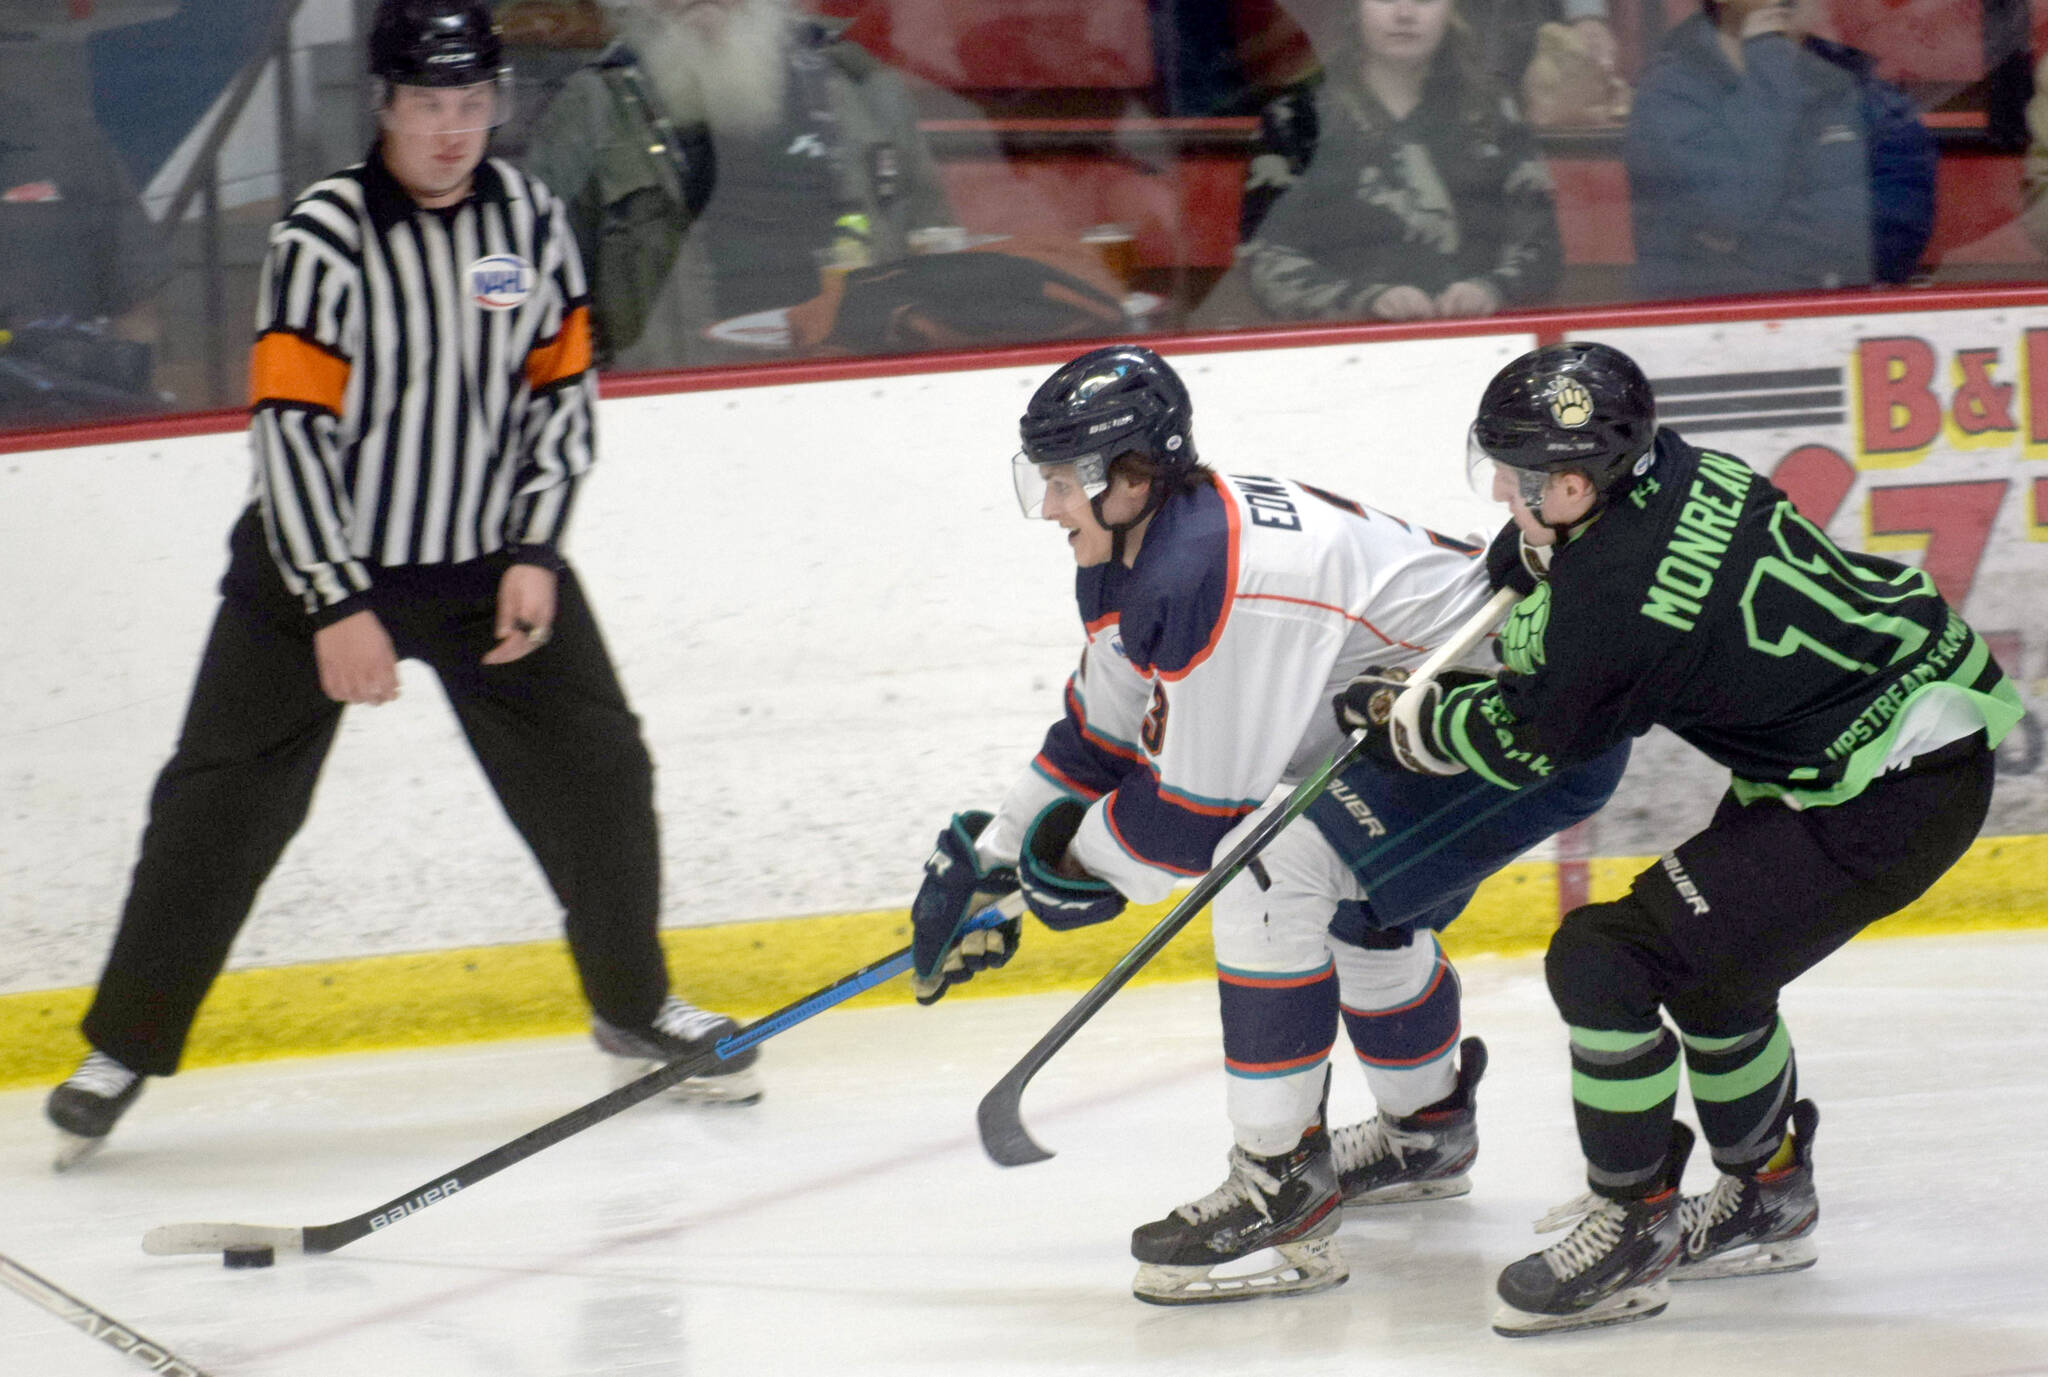 Anchorage Wolverines defenseman Ben Edwards shields the puck from Kenai River Brown Bears forward Bryce Monrean on Friday, Feb. 18, 2022, at the Soldotna Regional Sports Complex in Soldotna, Alaska. (Photo by Camille Botello/Peninsula Clarion)